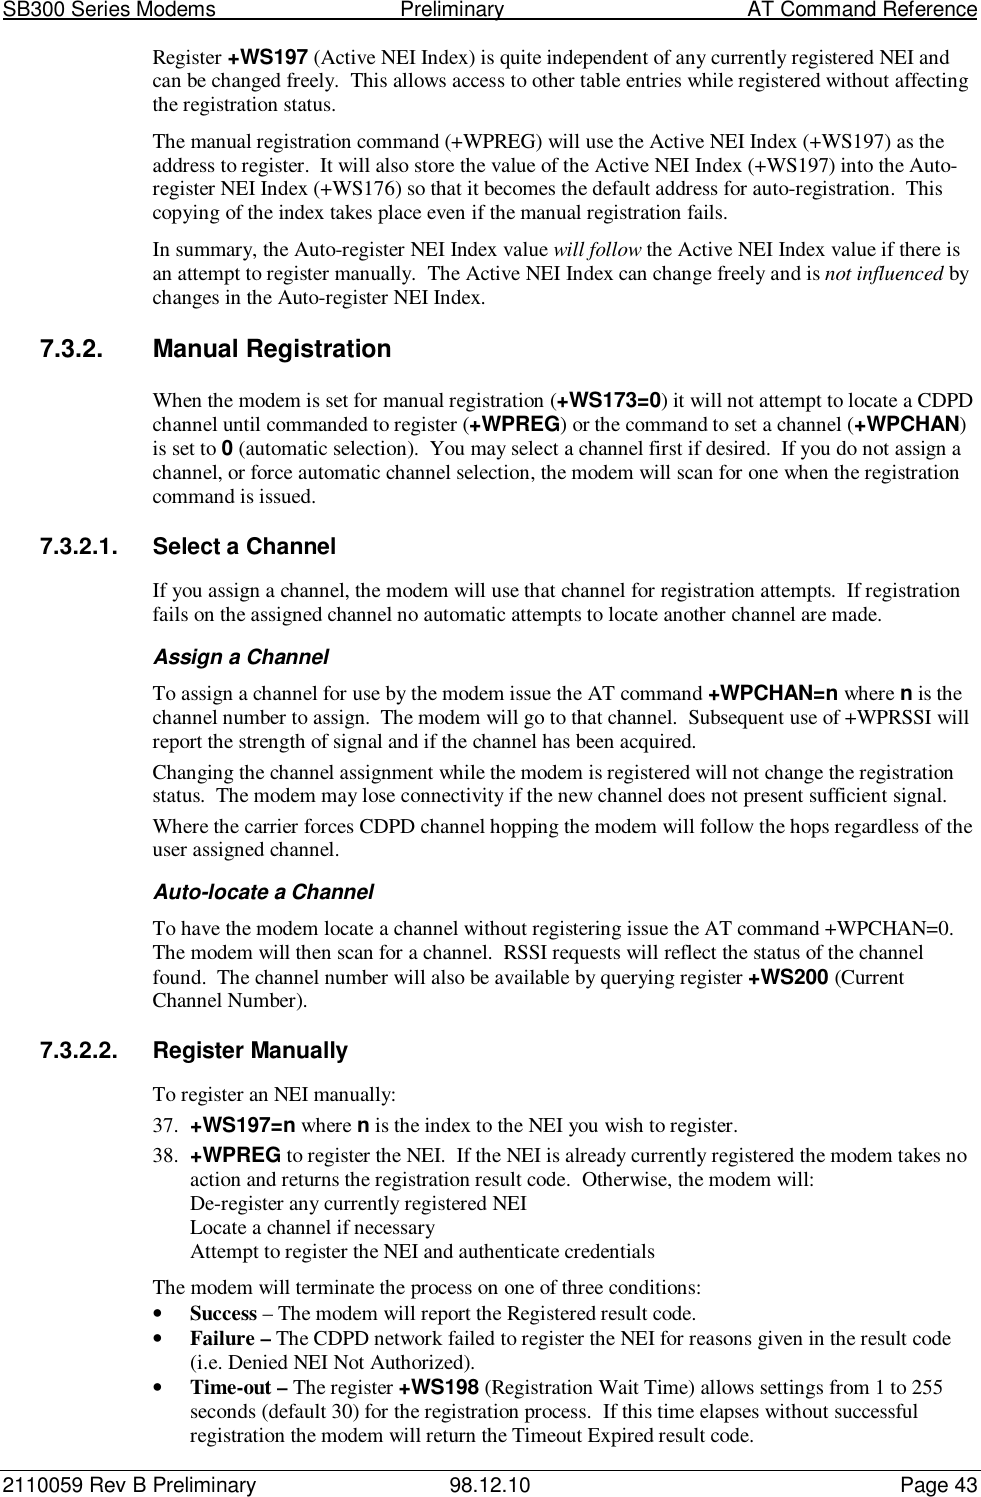 SB300 Series Modems                                  Preliminary                                         AT Command Reference2110059 Rev B Preliminary 98.12.10 Page 43Register +WS197 (Active NEI Index) is quite independent of any currently registered NEI andcan be changed freely.  This allows access to other table entries while registered without affectingthe registration status.The manual registration command (+WPREG) will use the Active NEI Index (+WS197) as theaddress to register.  It will also store the value of the Active NEI Index (+WS197) into the Auto-register NEI Index (+WS176) so that it becomes the default address for auto-registration.  Thiscopying of the index takes place even if the manual registration fails.In summary, the Auto-register NEI Index value will follow the Active NEI Index value if there isan attempt to register manually.  The Active NEI Index can change freely and is not influenced bychanges in the Auto-register NEI Index.7.3.2. Manual RegistrationWhen the modem is set for manual registration (+WS173=0) it will not attempt to locate a CDPDchannel until commanded to register (+WPREG) or the command to set a channel (+WPCHAN)is set to 0 (automatic selection).  You may select a channel first if desired.  If you do not assign achannel, or force automatic channel selection, the modem will scan for one when the registrationcommand is issued.7.3.2.1.  Select a ChannelIf you assign a channel, the modem will use that channel for registration attempts.  If registrationfails on the assigned channel no automatic attempts to locate another channel are made.Assign a ChannelTo assign a channel for use by the modem issue the AT command +WPCHAN=n where n is thechannel number to assign.  The modem will go to that channel.  Subsequent use of +WPRSSI willreport the strength of signal and if the channel has been acquired.Changing the channel assignment while the modem is registered will not change the registrationstatus.  The modem may lose connectivity if the new channel does not present sufficient signal.Where the carrier forces CDPD channel hopping the modem will follow the hops regardless of theuser assigned channel.Auto-locate a ChannelTo have the modem locate a channel without registering issue the AT command +WPCHAN=0.The modem will then scan for a channel.  RSSI requests will reflect the status of the channelfound.  The channel number will also be available by querying register +WS200 (CurrentChannel Number).7.3.2.2.  Register ManuallyTo register an NEI manually:37. +WS197=n where n is the index to the NEI you wish to register.38. +WPREG to register the NEI.  If the NEI is already currently registered the modem takes noaction and returns the registration result code.  Otherwise, the modem will:De-register any currently registered NEILocate a channel if necessaryAttempt to register the NEI and authenticate credentialsThe modem will terminate the process on one of three conditions:• Success – The modem will report the Registered result code.• Failure – The CDPD network failed to register the NEI for reasons given in the result code(i.e. Denied NEI Not Authorized).• Time-out – The register +WS198 (Registration Wait Time) allows settings from 1 to 255seconds (default 30) for the registration process.  If this time elapses without successfulregistration the modem will return the Timeout Expired result code.